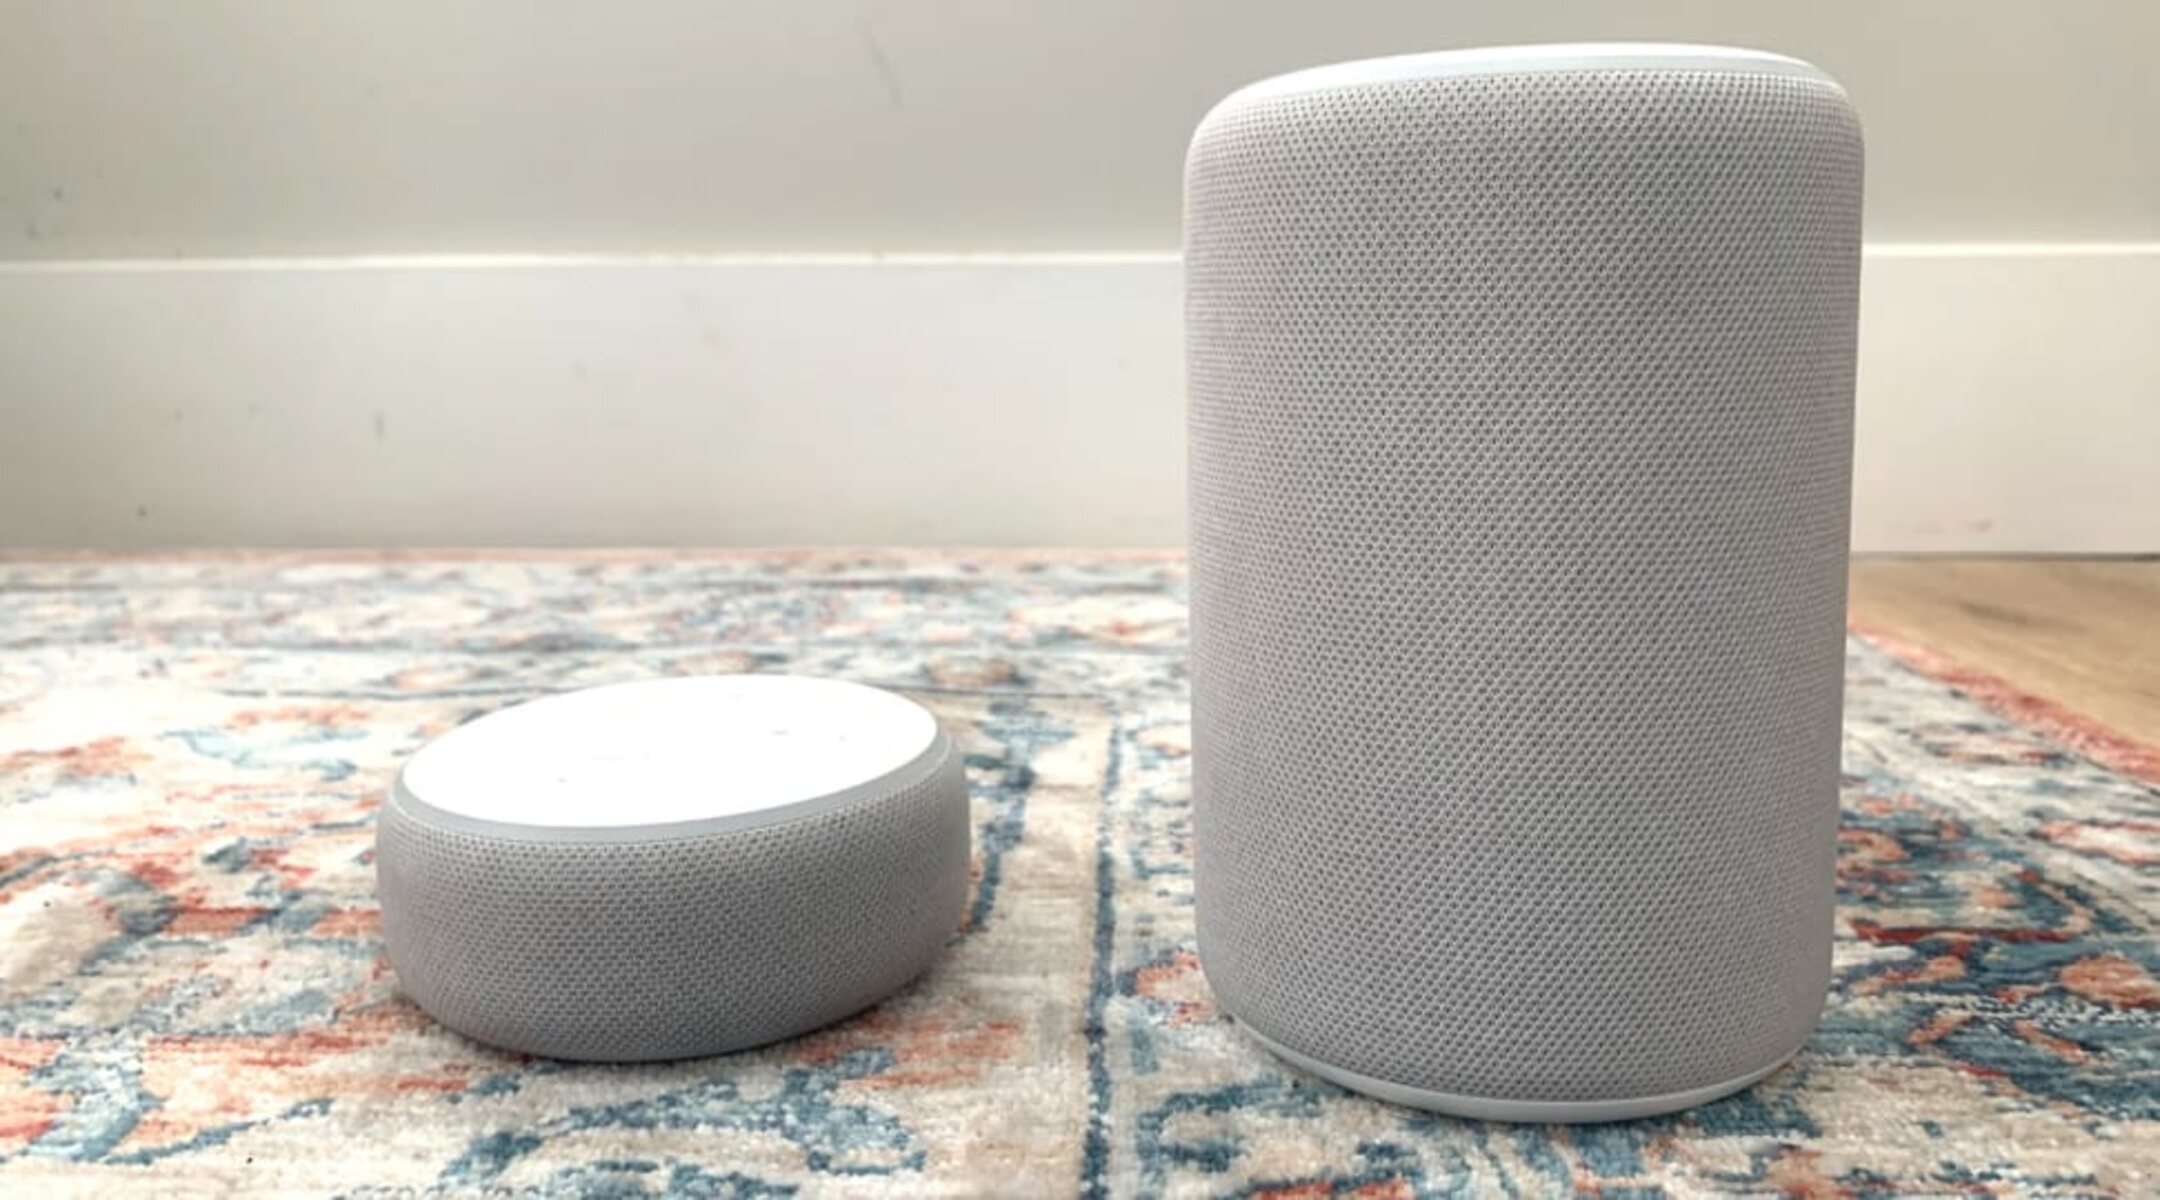 what-is-the-difference-between-an-echo-dot-and-an-echo-smart-speaker